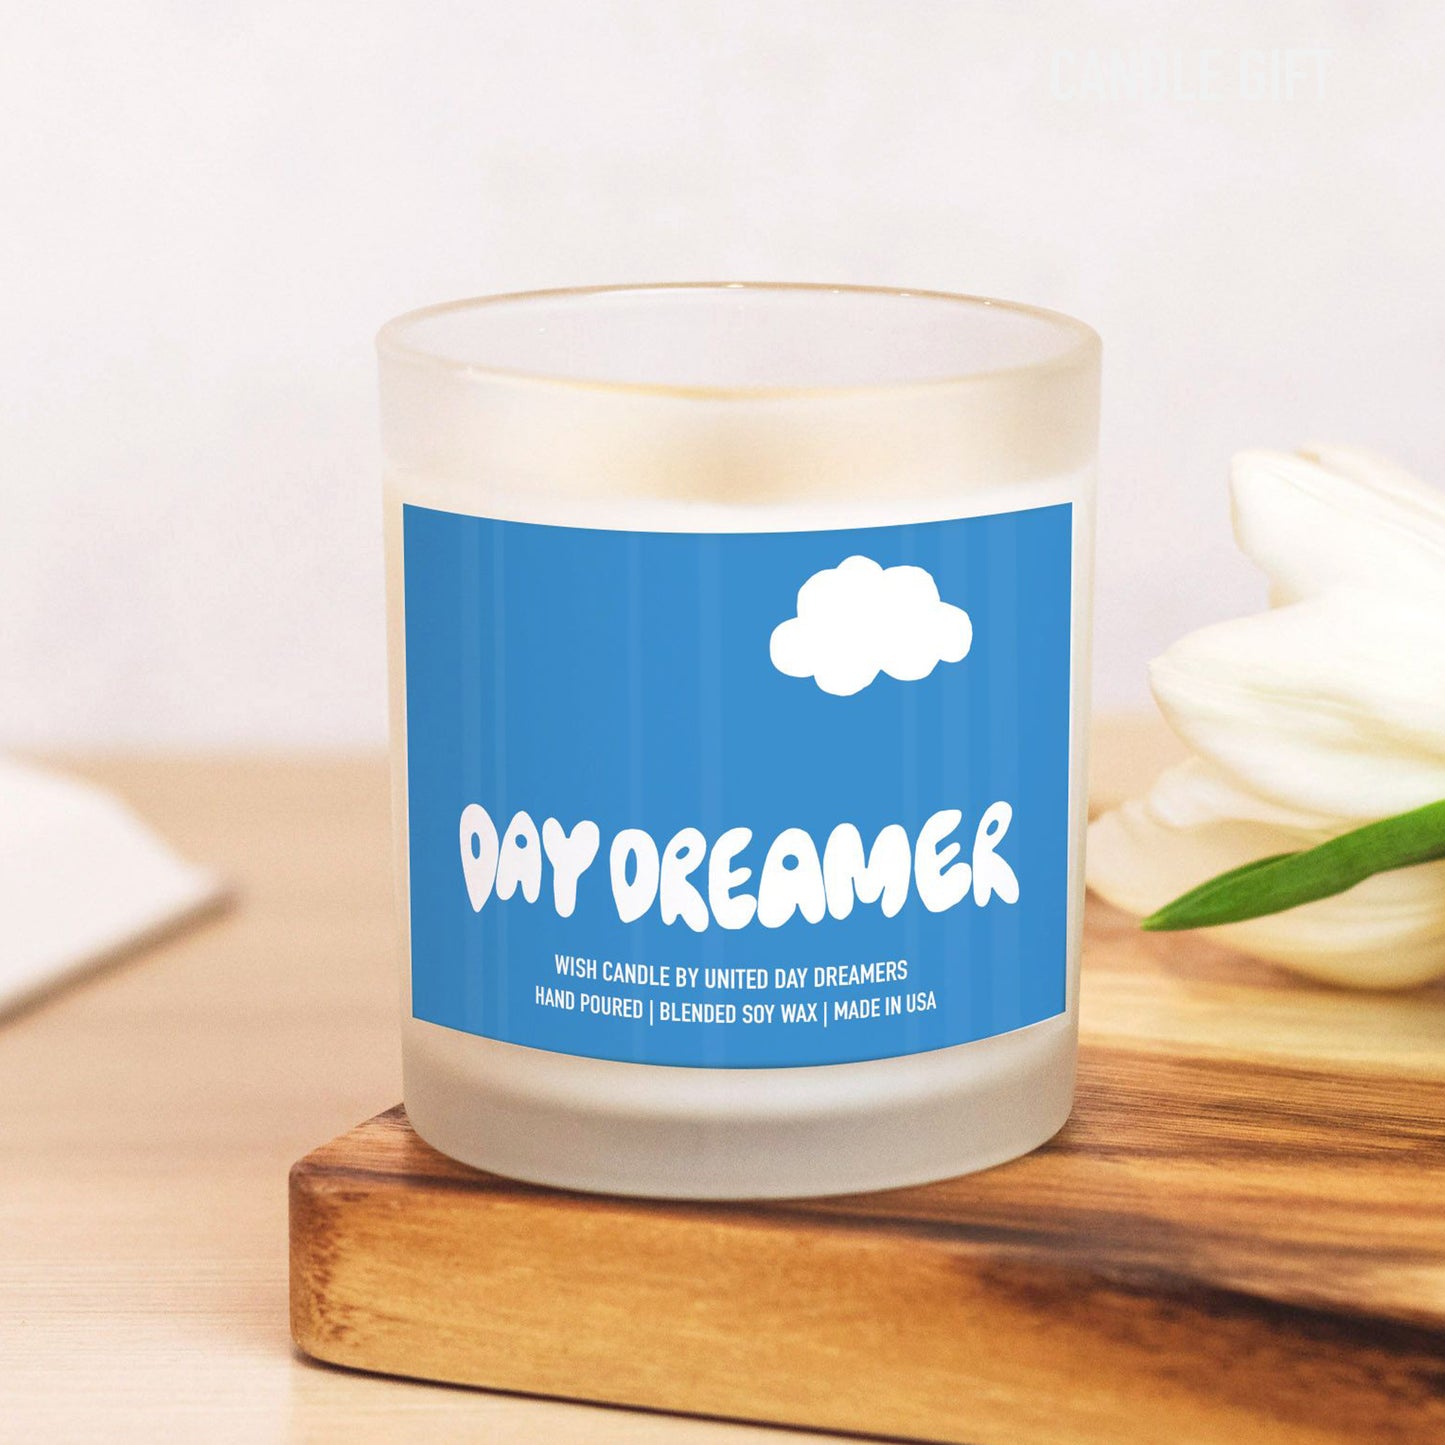 Day Dreamer Candle 11 oz